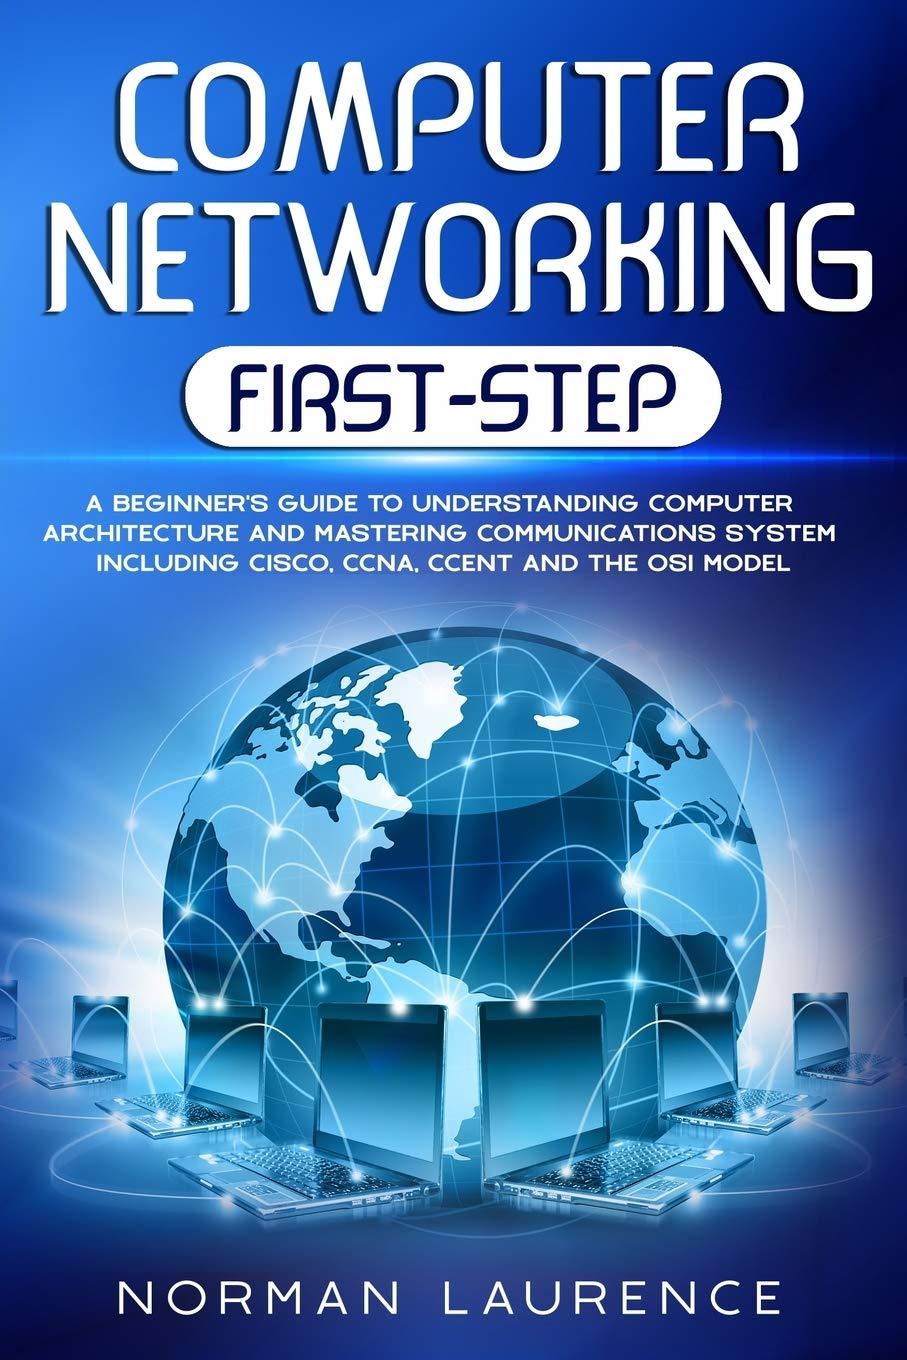 computer networking first step a beginner’s guide to understanding computer architecture and mastering